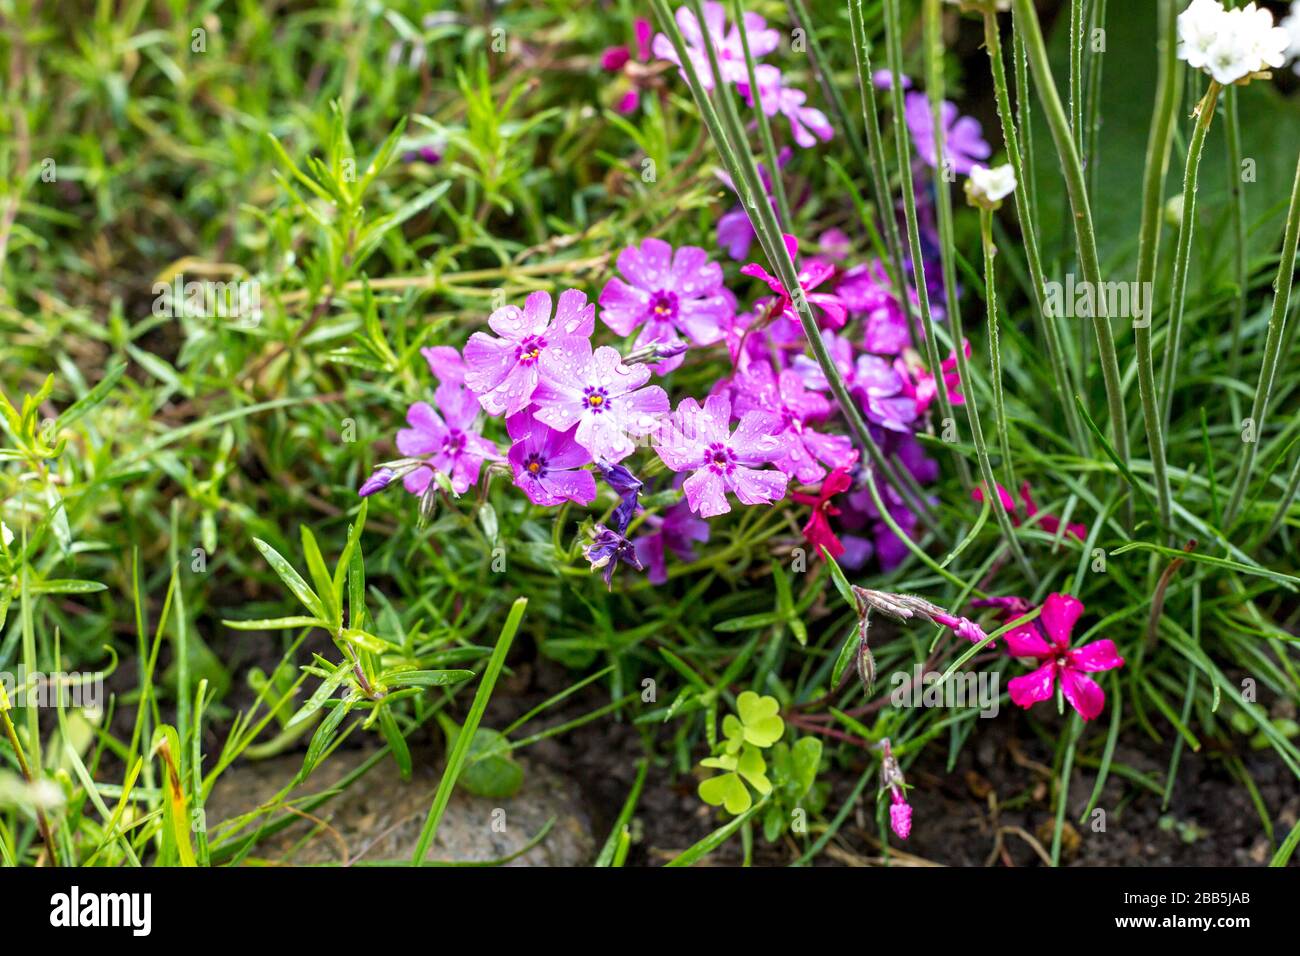 Pink creeping phlox flowers with raindrops in a garden Stock Photo